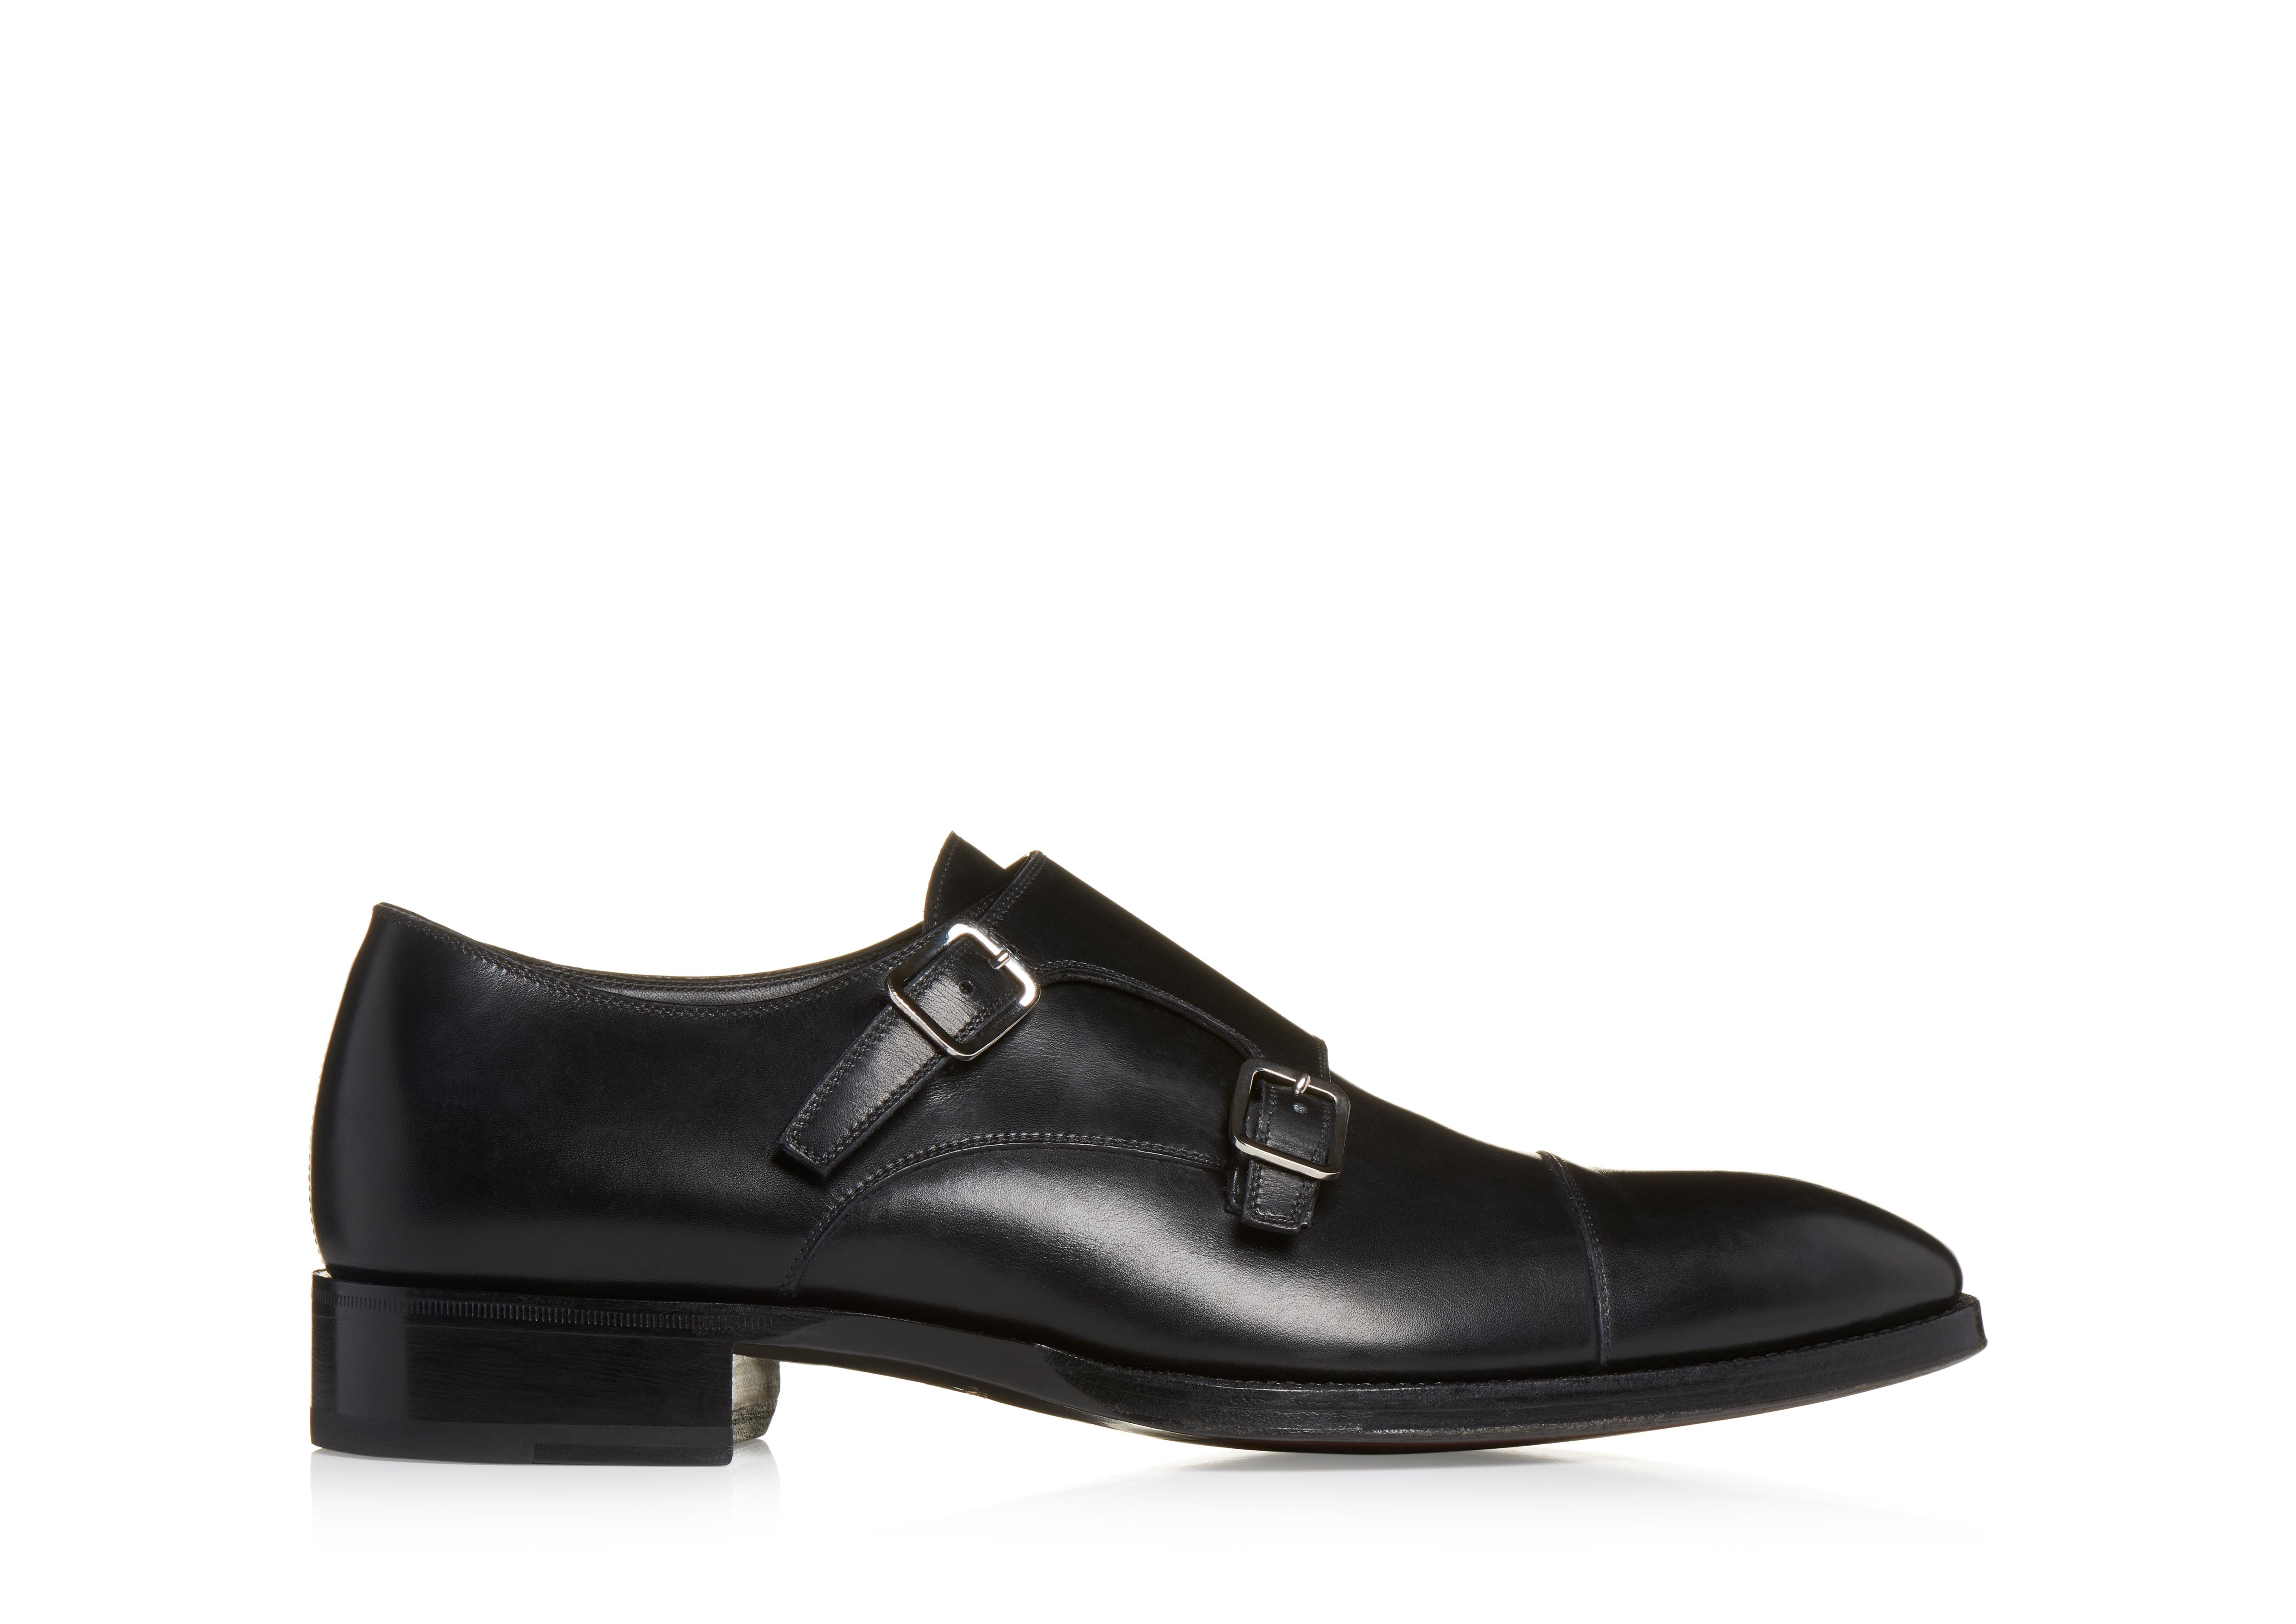 Tom Ford ELKAN DOUBLE MONK STRAPS | TomFord.com